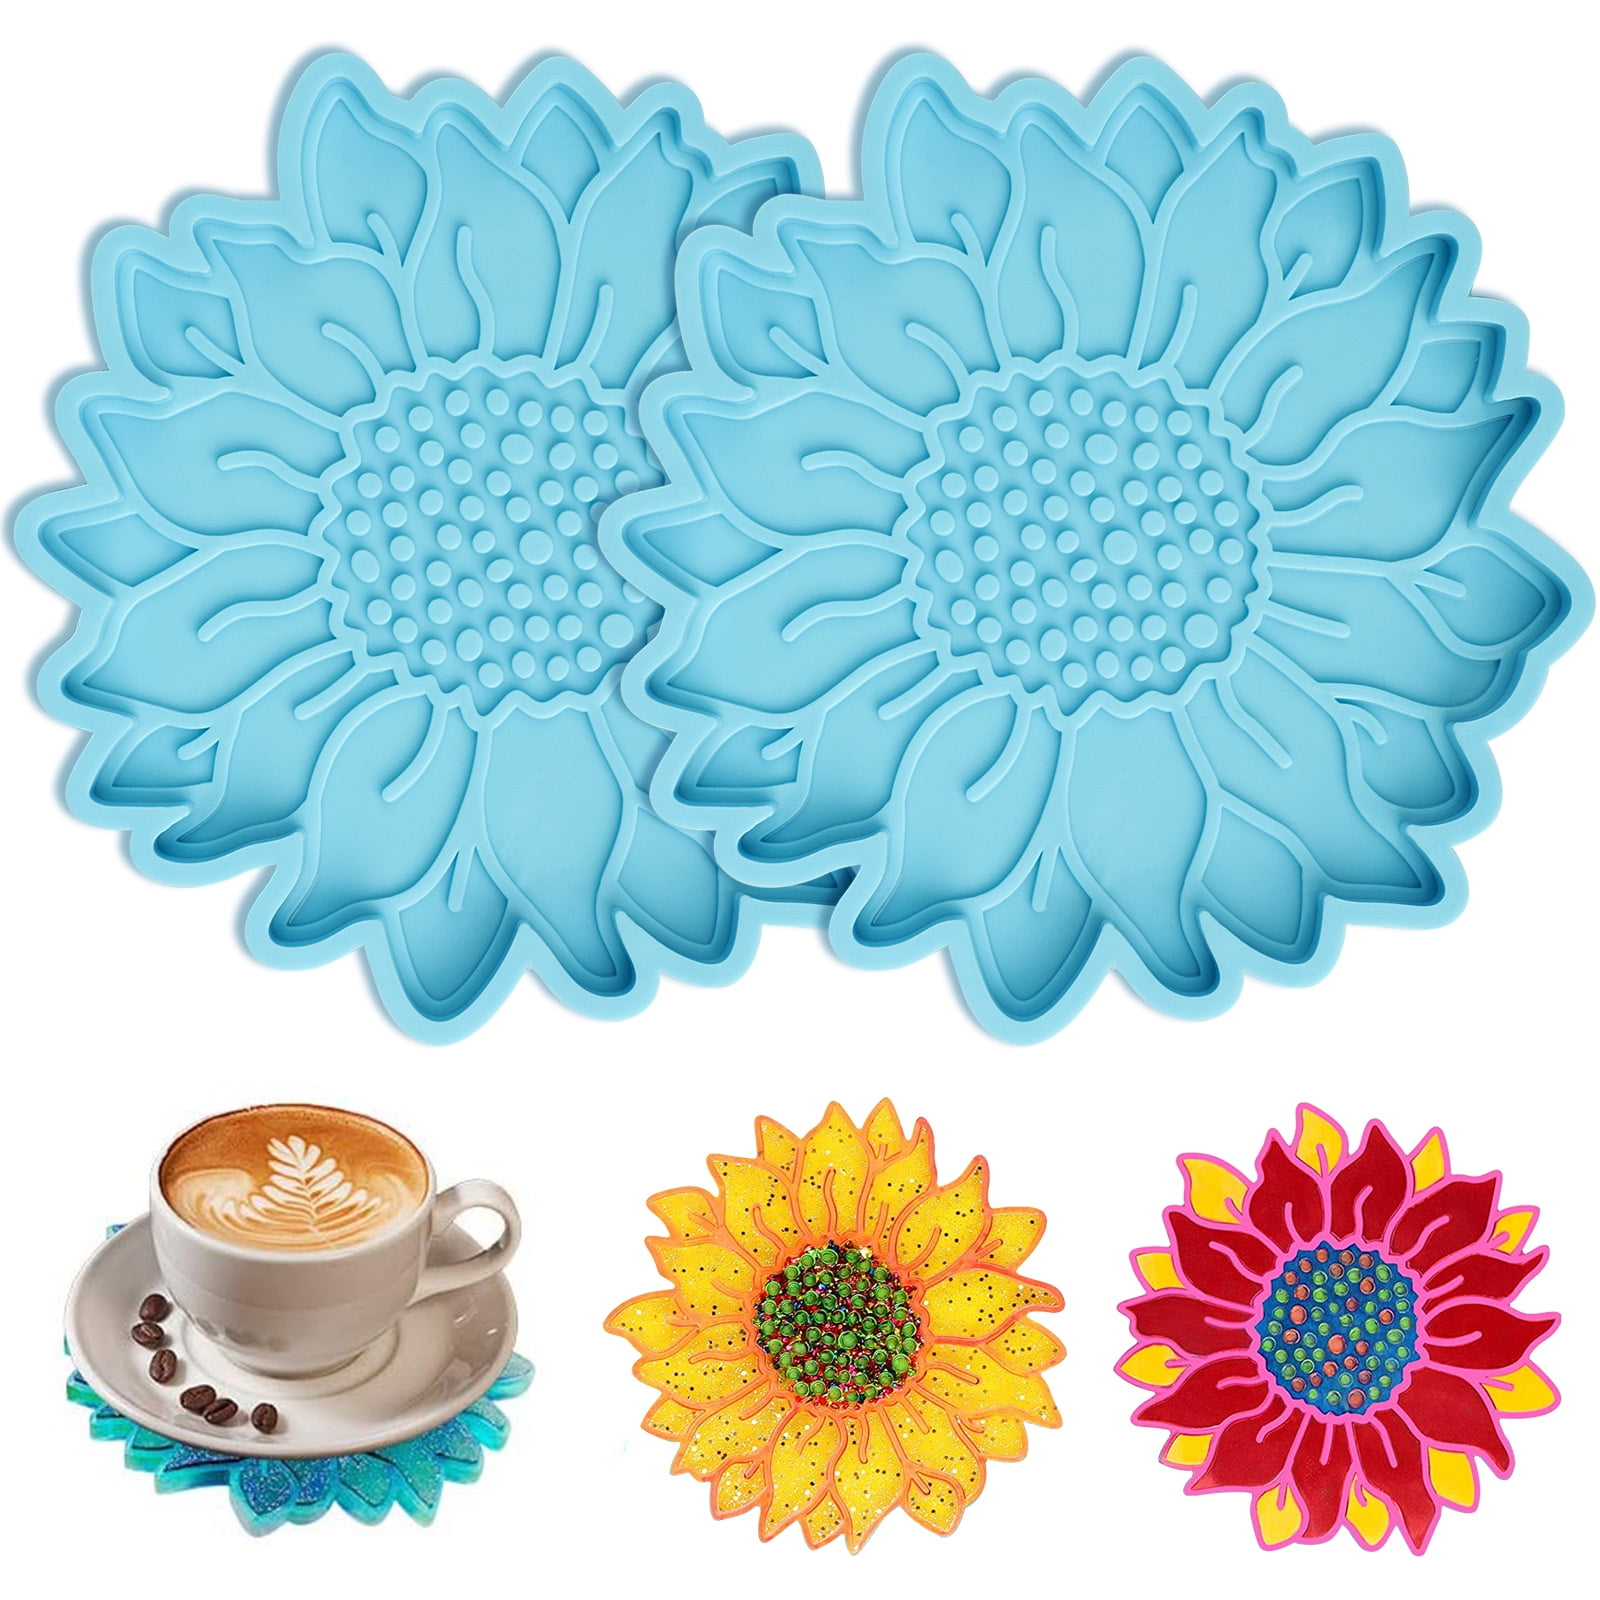 Sunflower Coasters Silicone Mold For DIY Tray Epoxy Art Resin S Crystal G4C1 